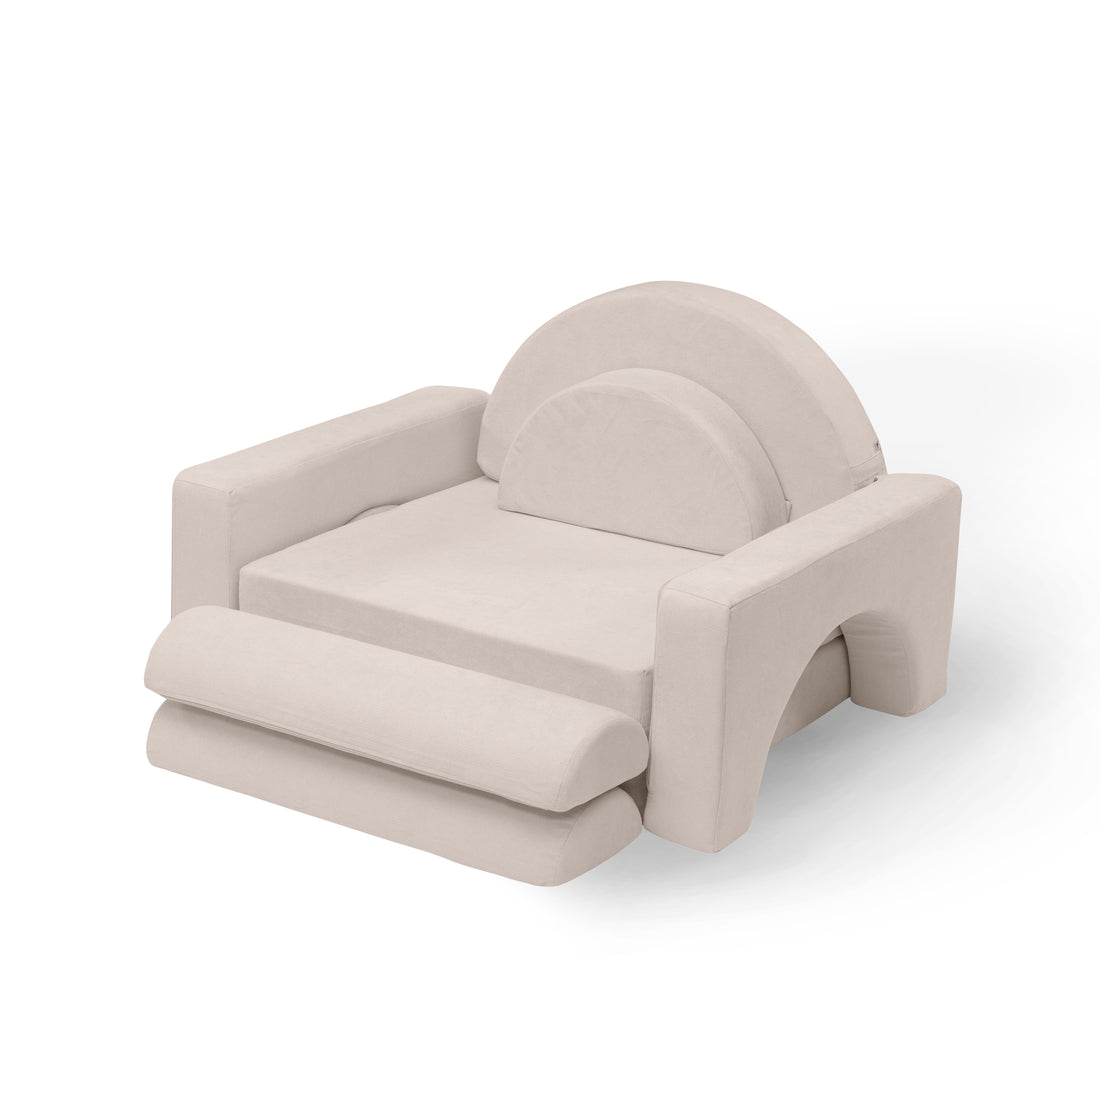 a play couch in arm chair setting using special arch shapes unique to membina